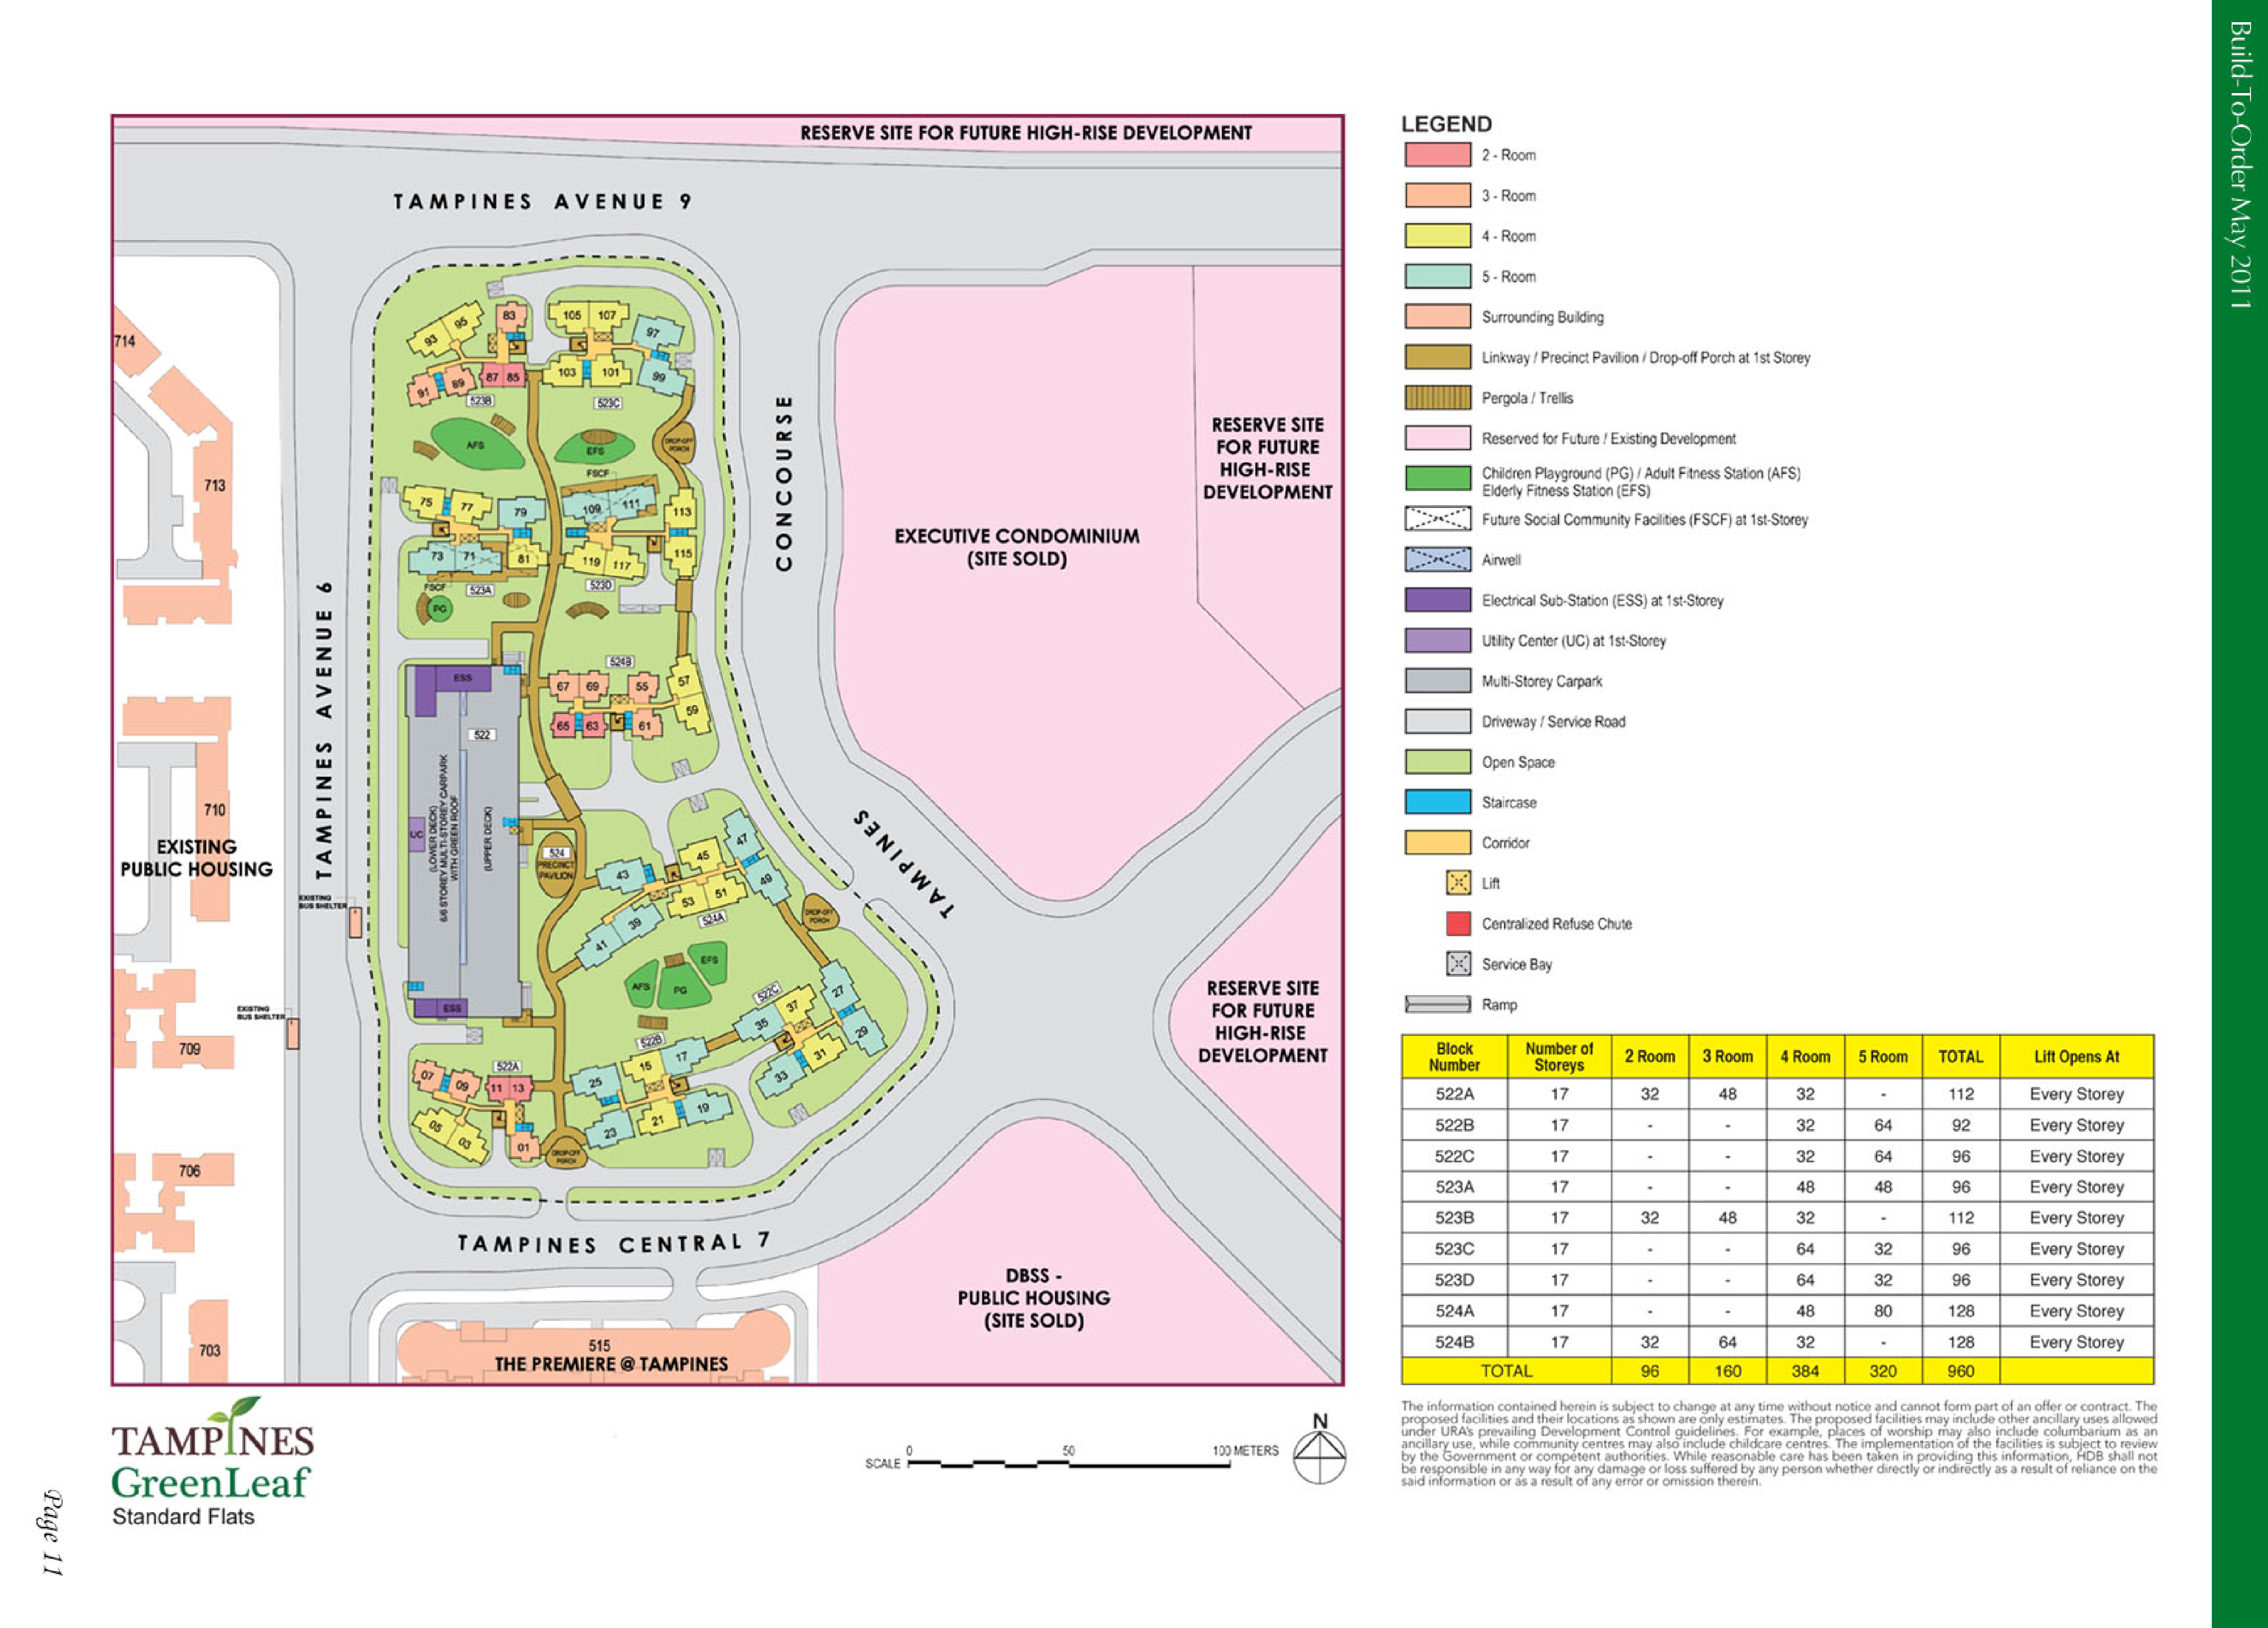 HDB Tampines Greenleaf BTO launched in May 2011 site plan